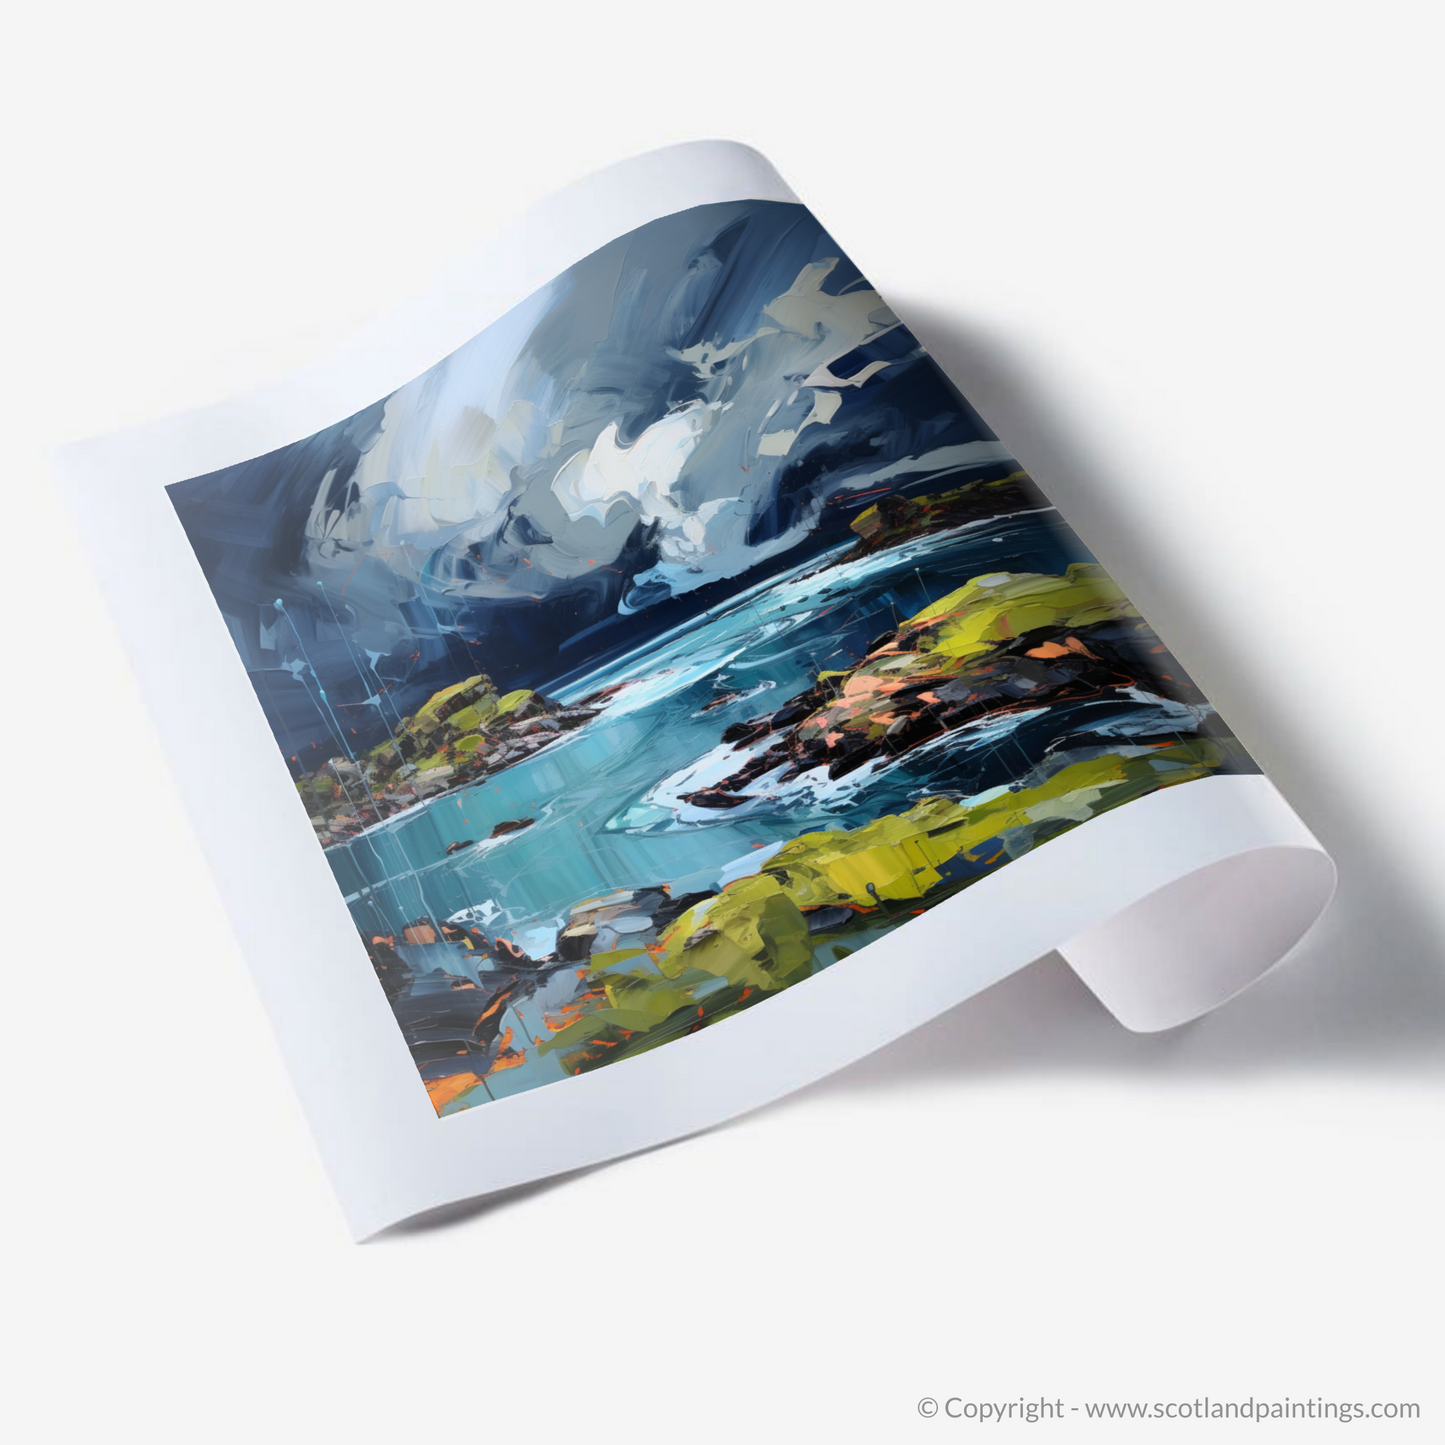 Art Print of Ardalanish Bay with a stormy sky